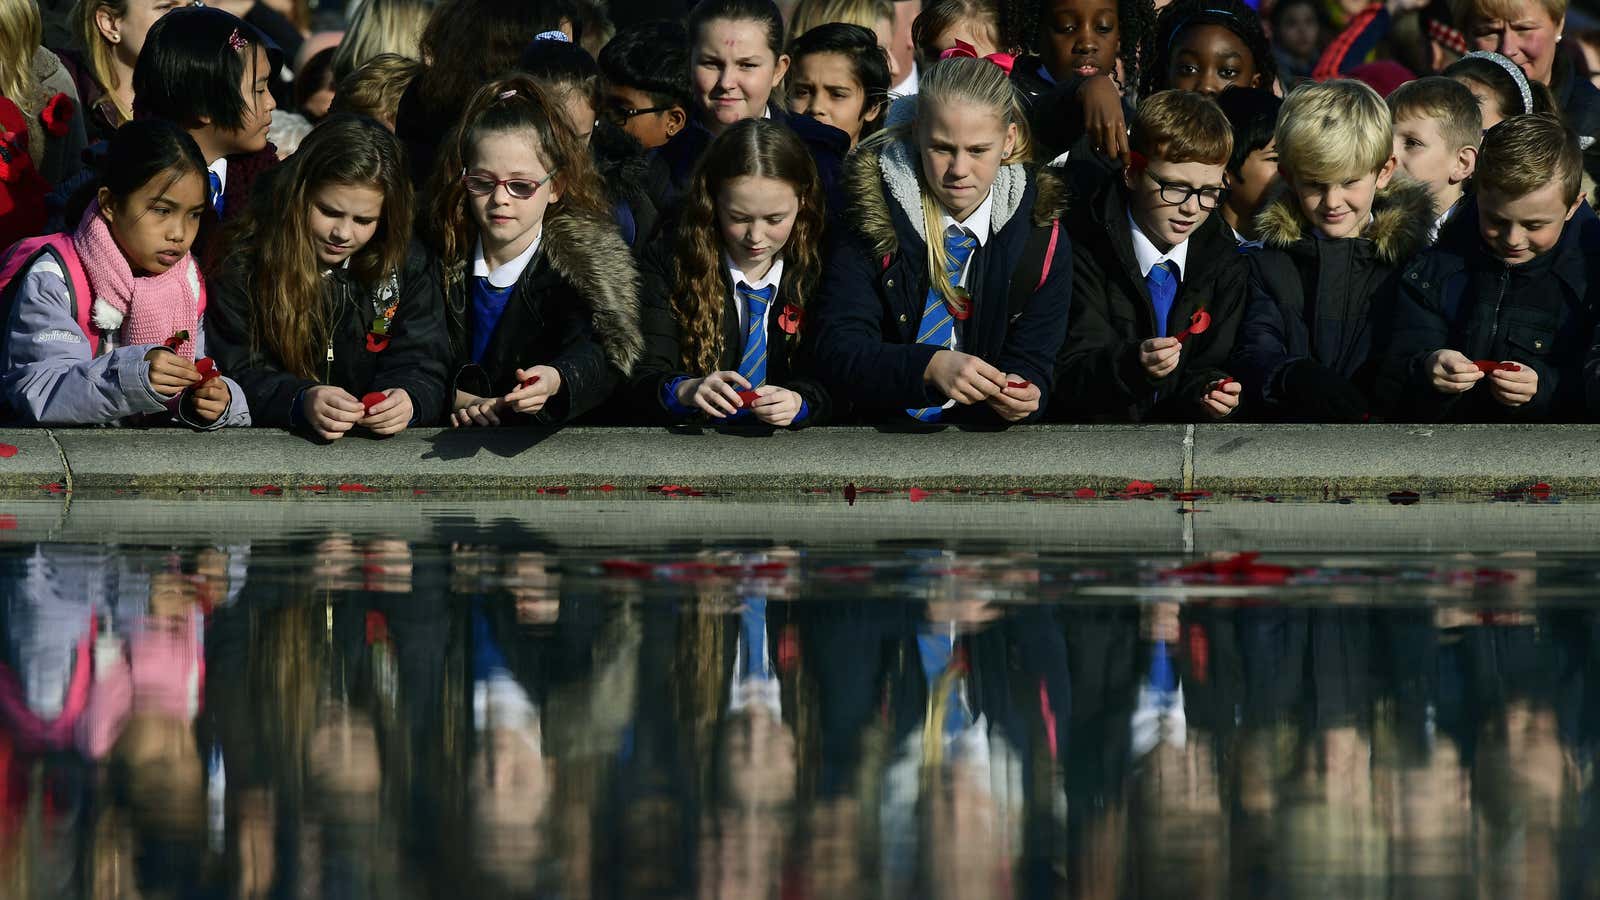 School childern throw poppies into a fountain during an Armistice Day event at Trafalgar Square in London…